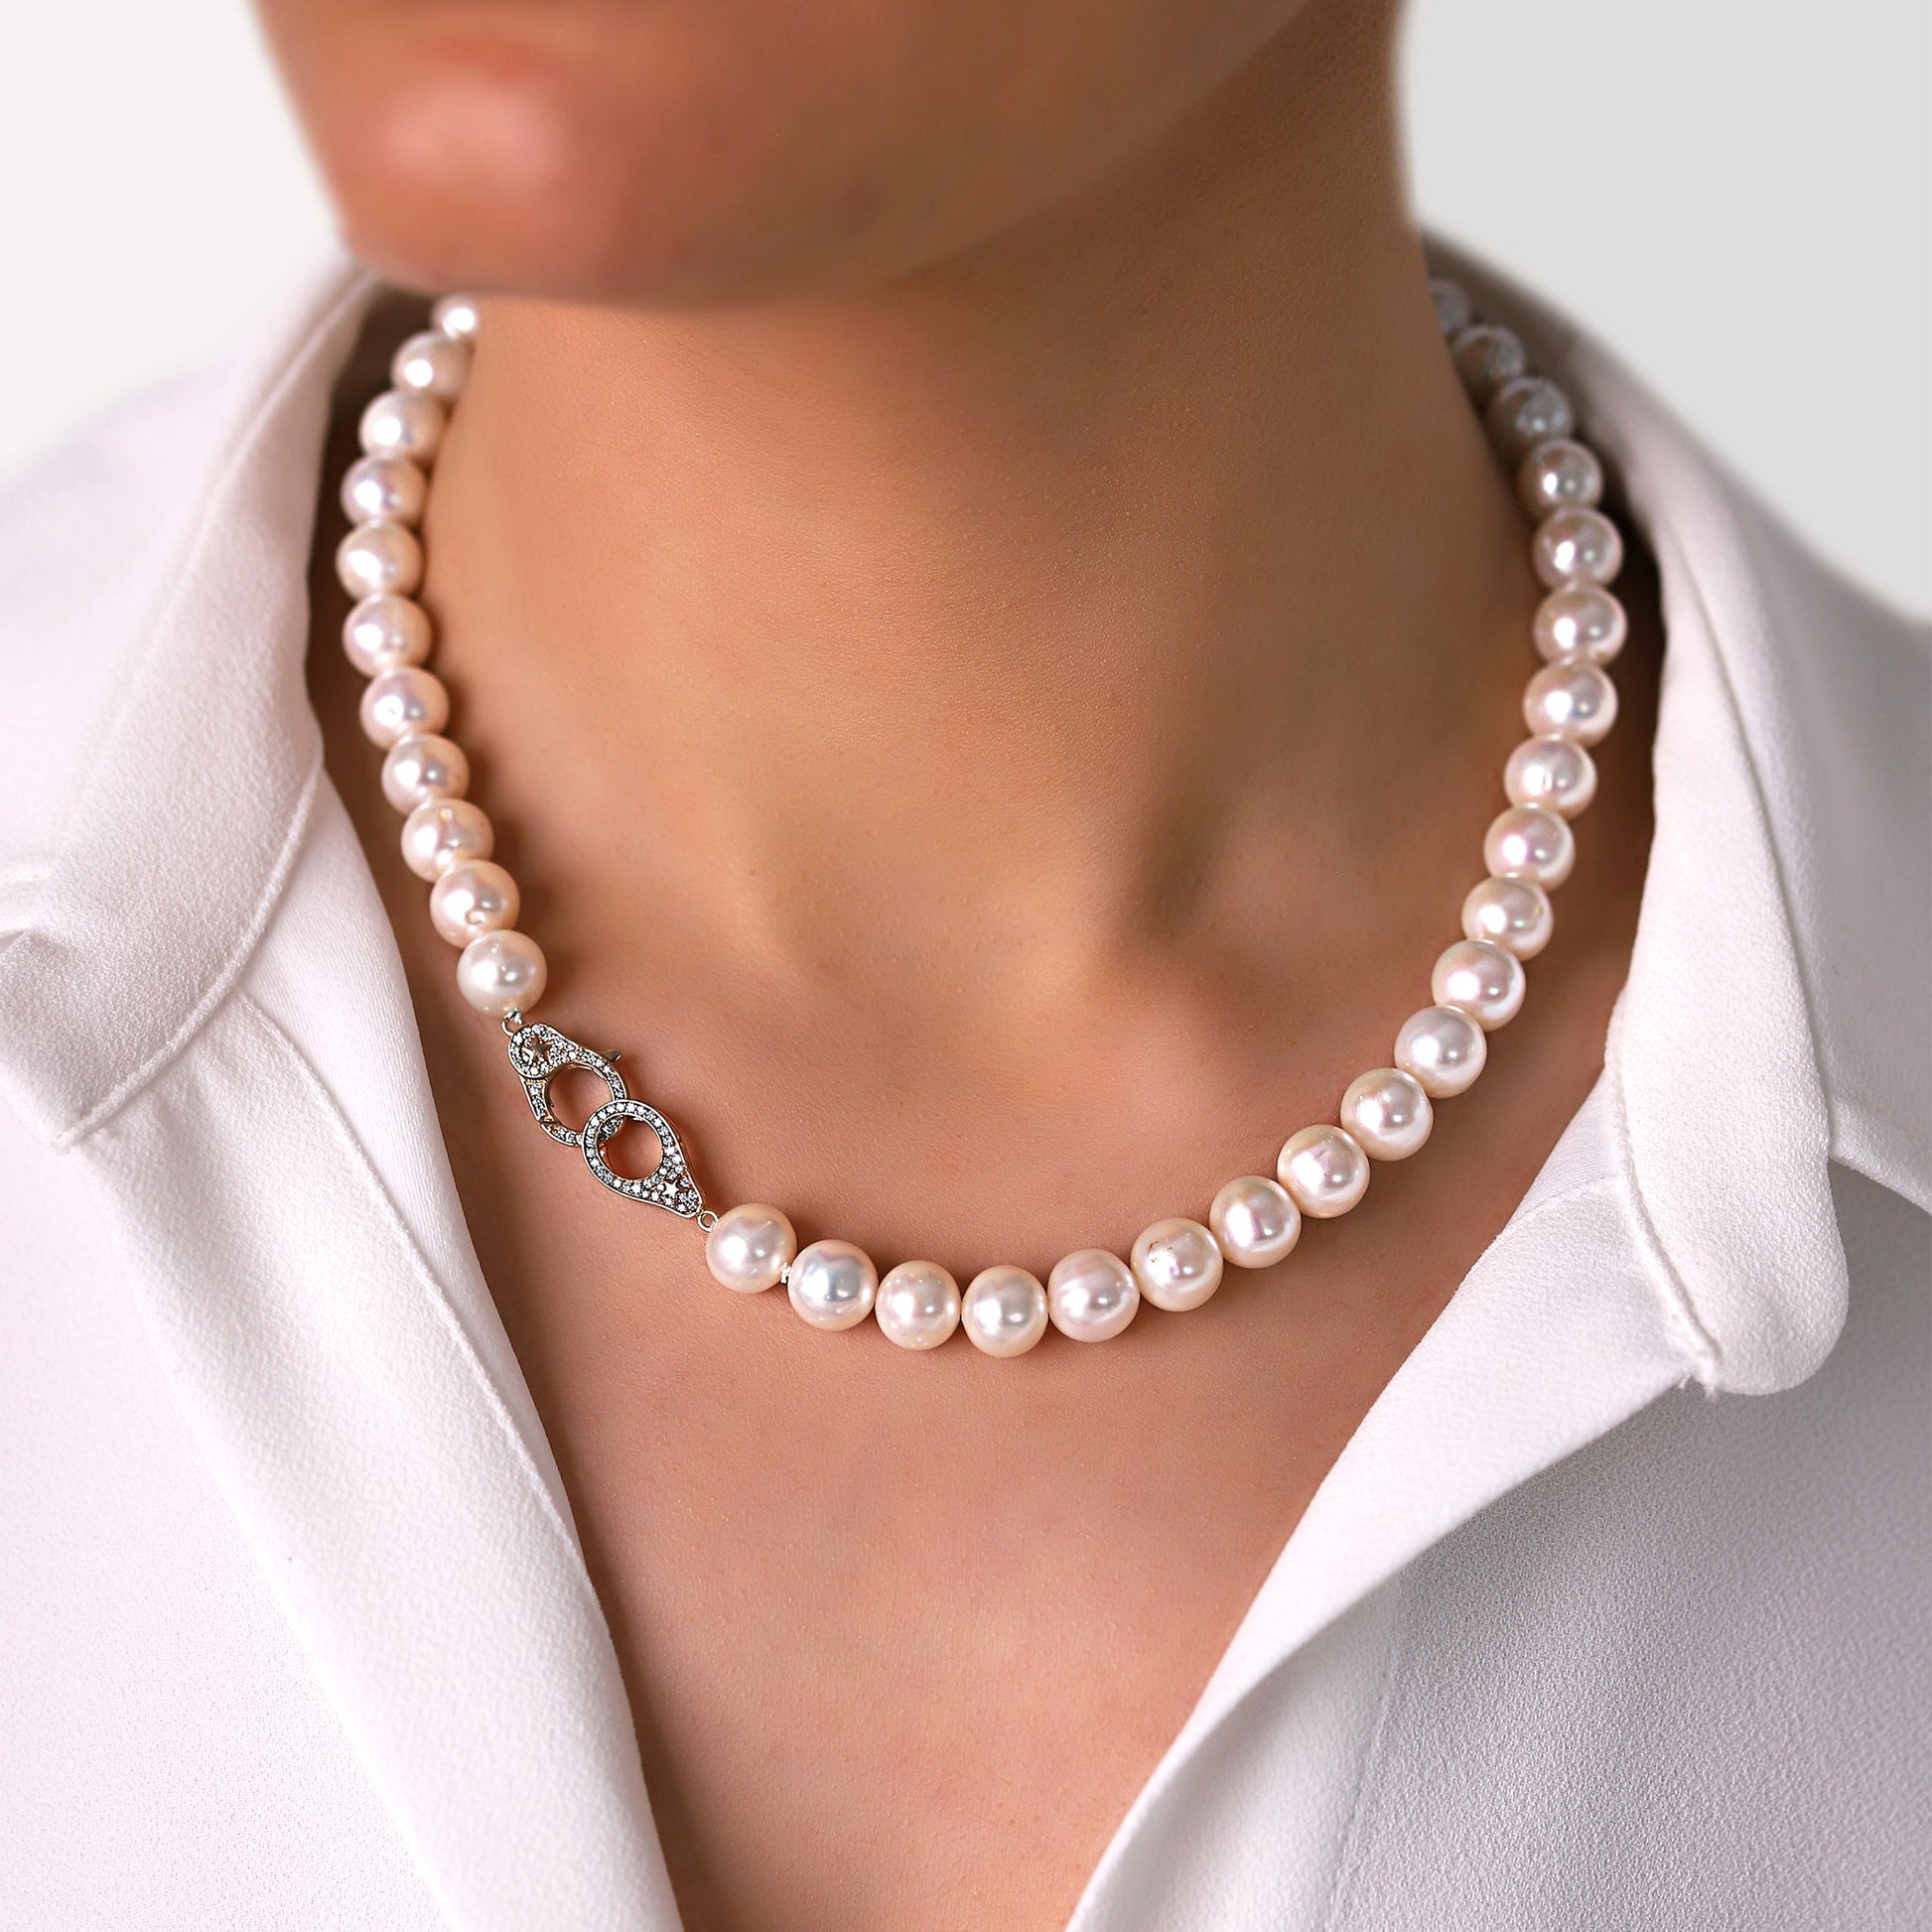 Jewelry Pearls | Diamond Necklace | 0.64 Cts. | 14K Gold - necklace Zengoda Shop online from Artisan Brands